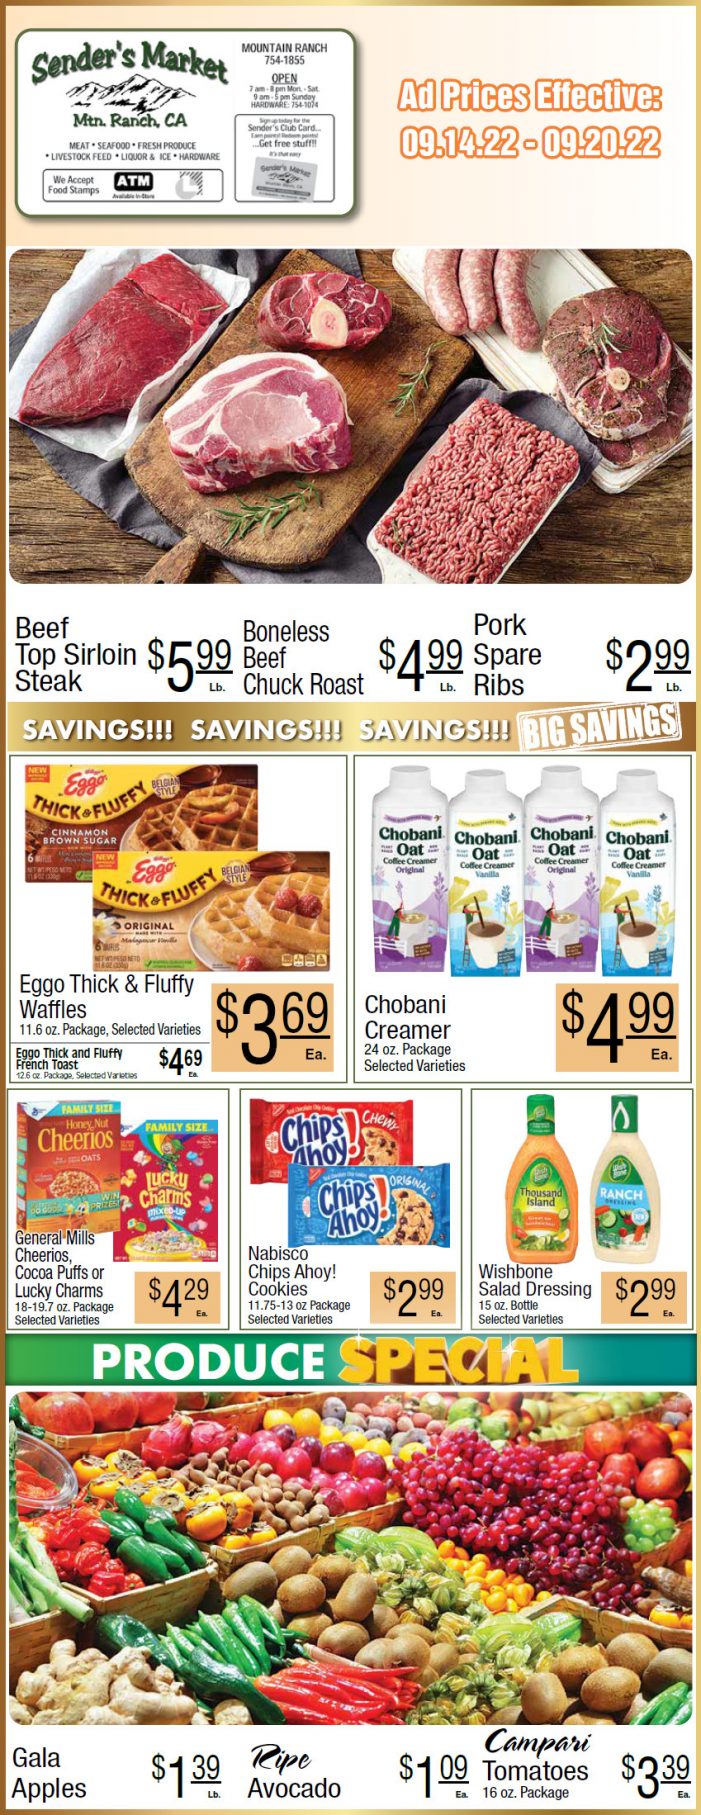 Sender’s Market Weekly Ad & Grocery Specials Through September 20th! Shop Local & Save!